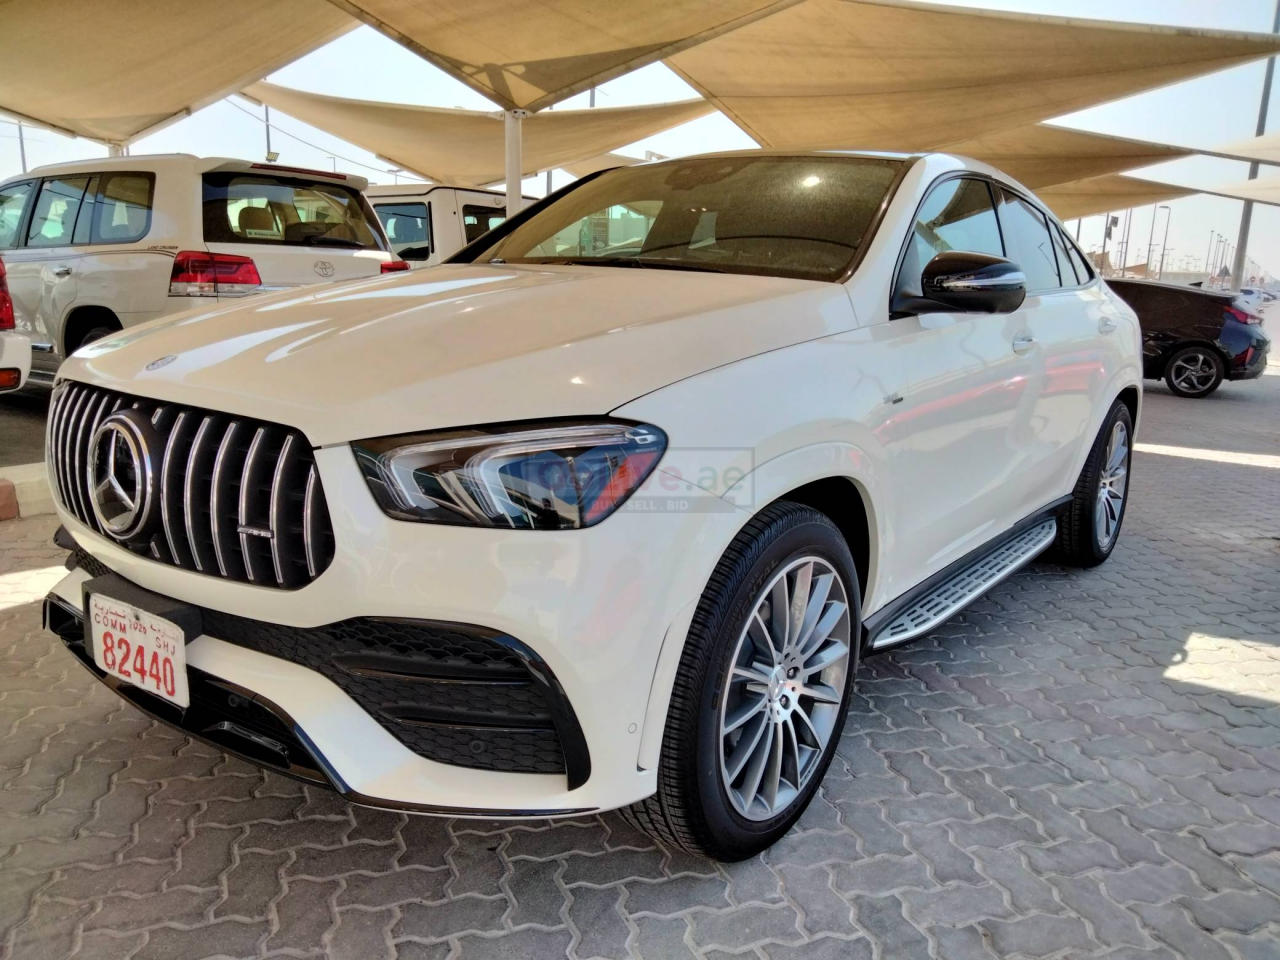 Mercedes Benz GLE Coupe 2021 AED 430,000, GCC Spec, Good condition, Warranty, Full Option, Turbo, Sunroof